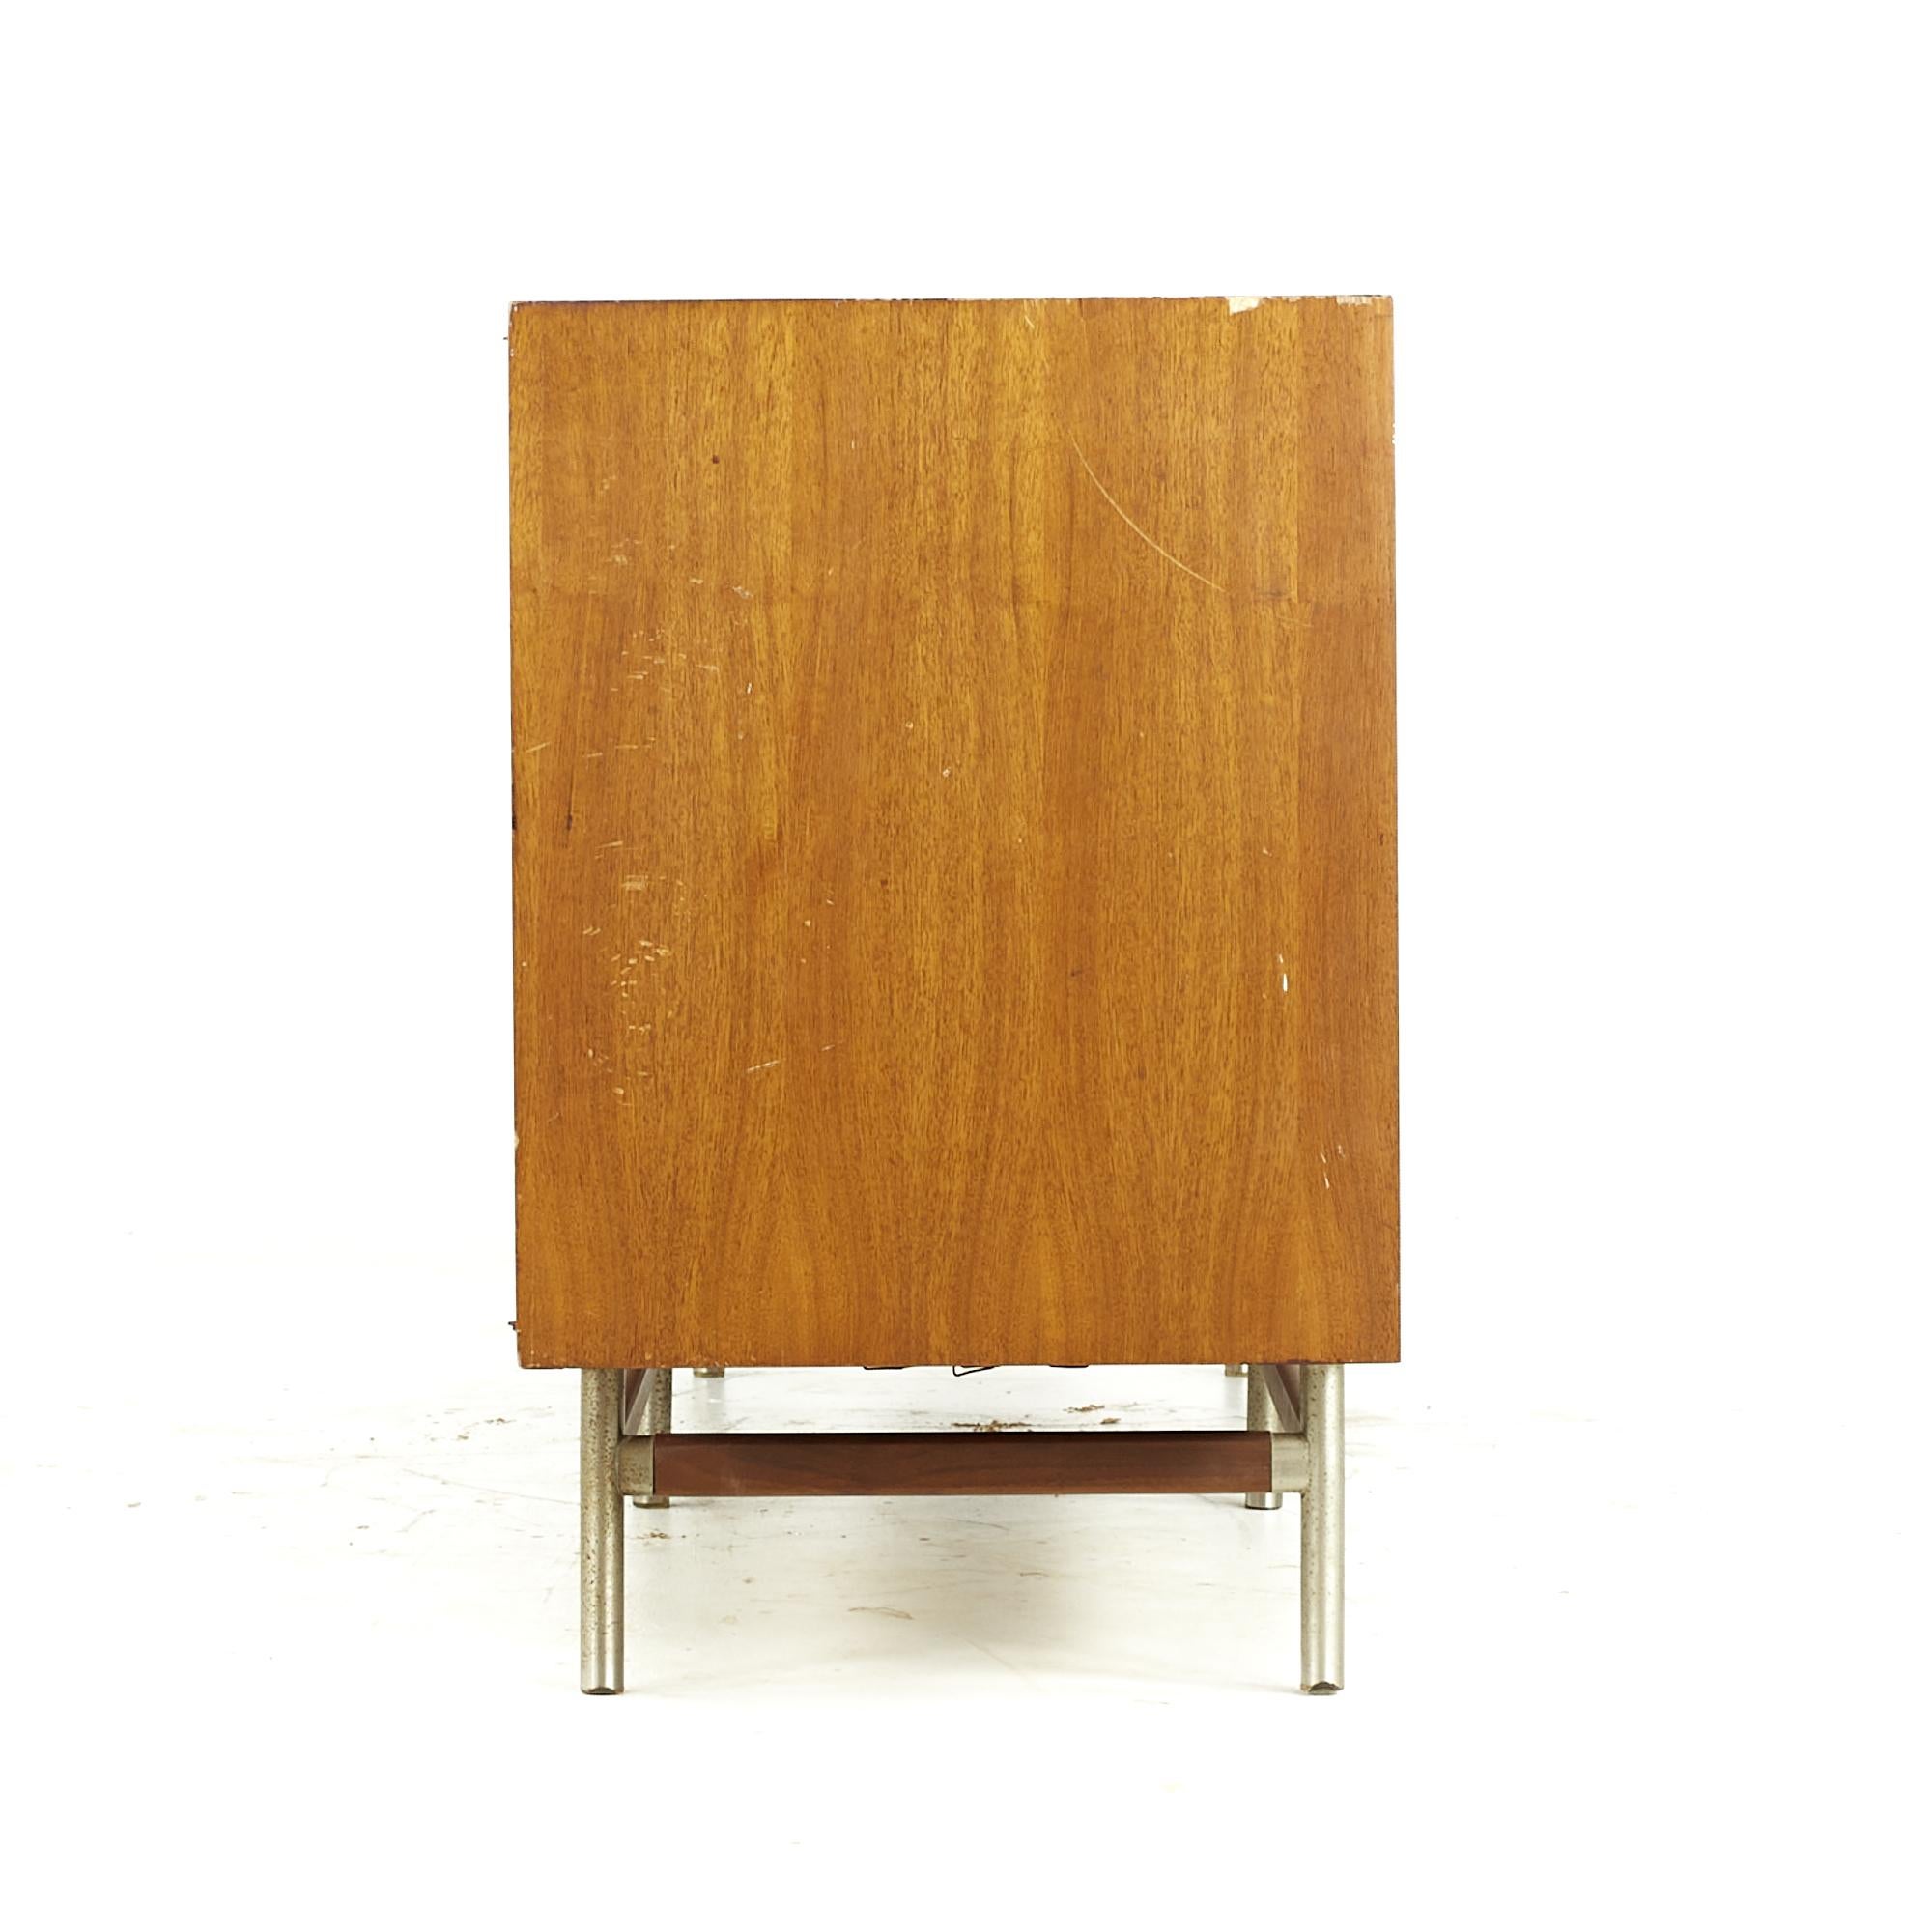 Kroehler Signature Midcentury Walnut and Rosewood Lowboy Dresser In Good Condition For Sale In Countryside, IL